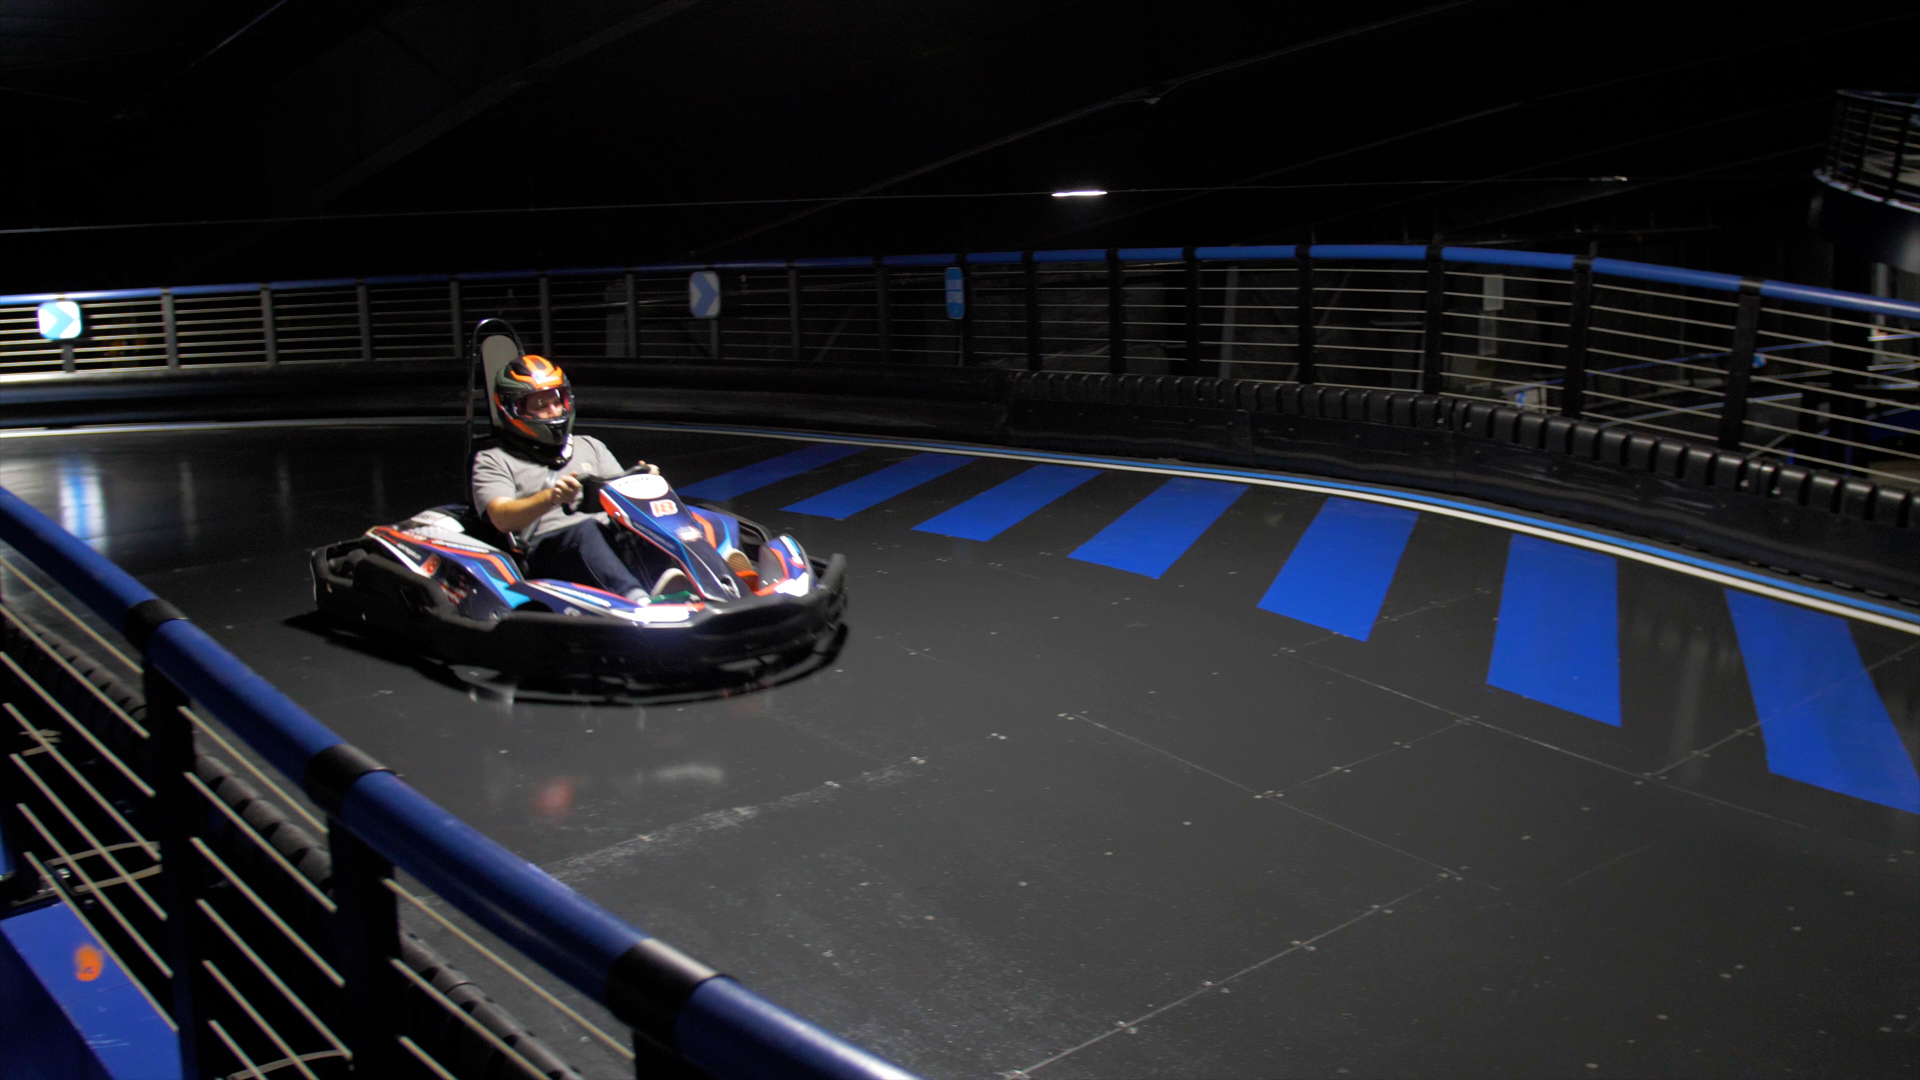 Discover the world with electric go-karts